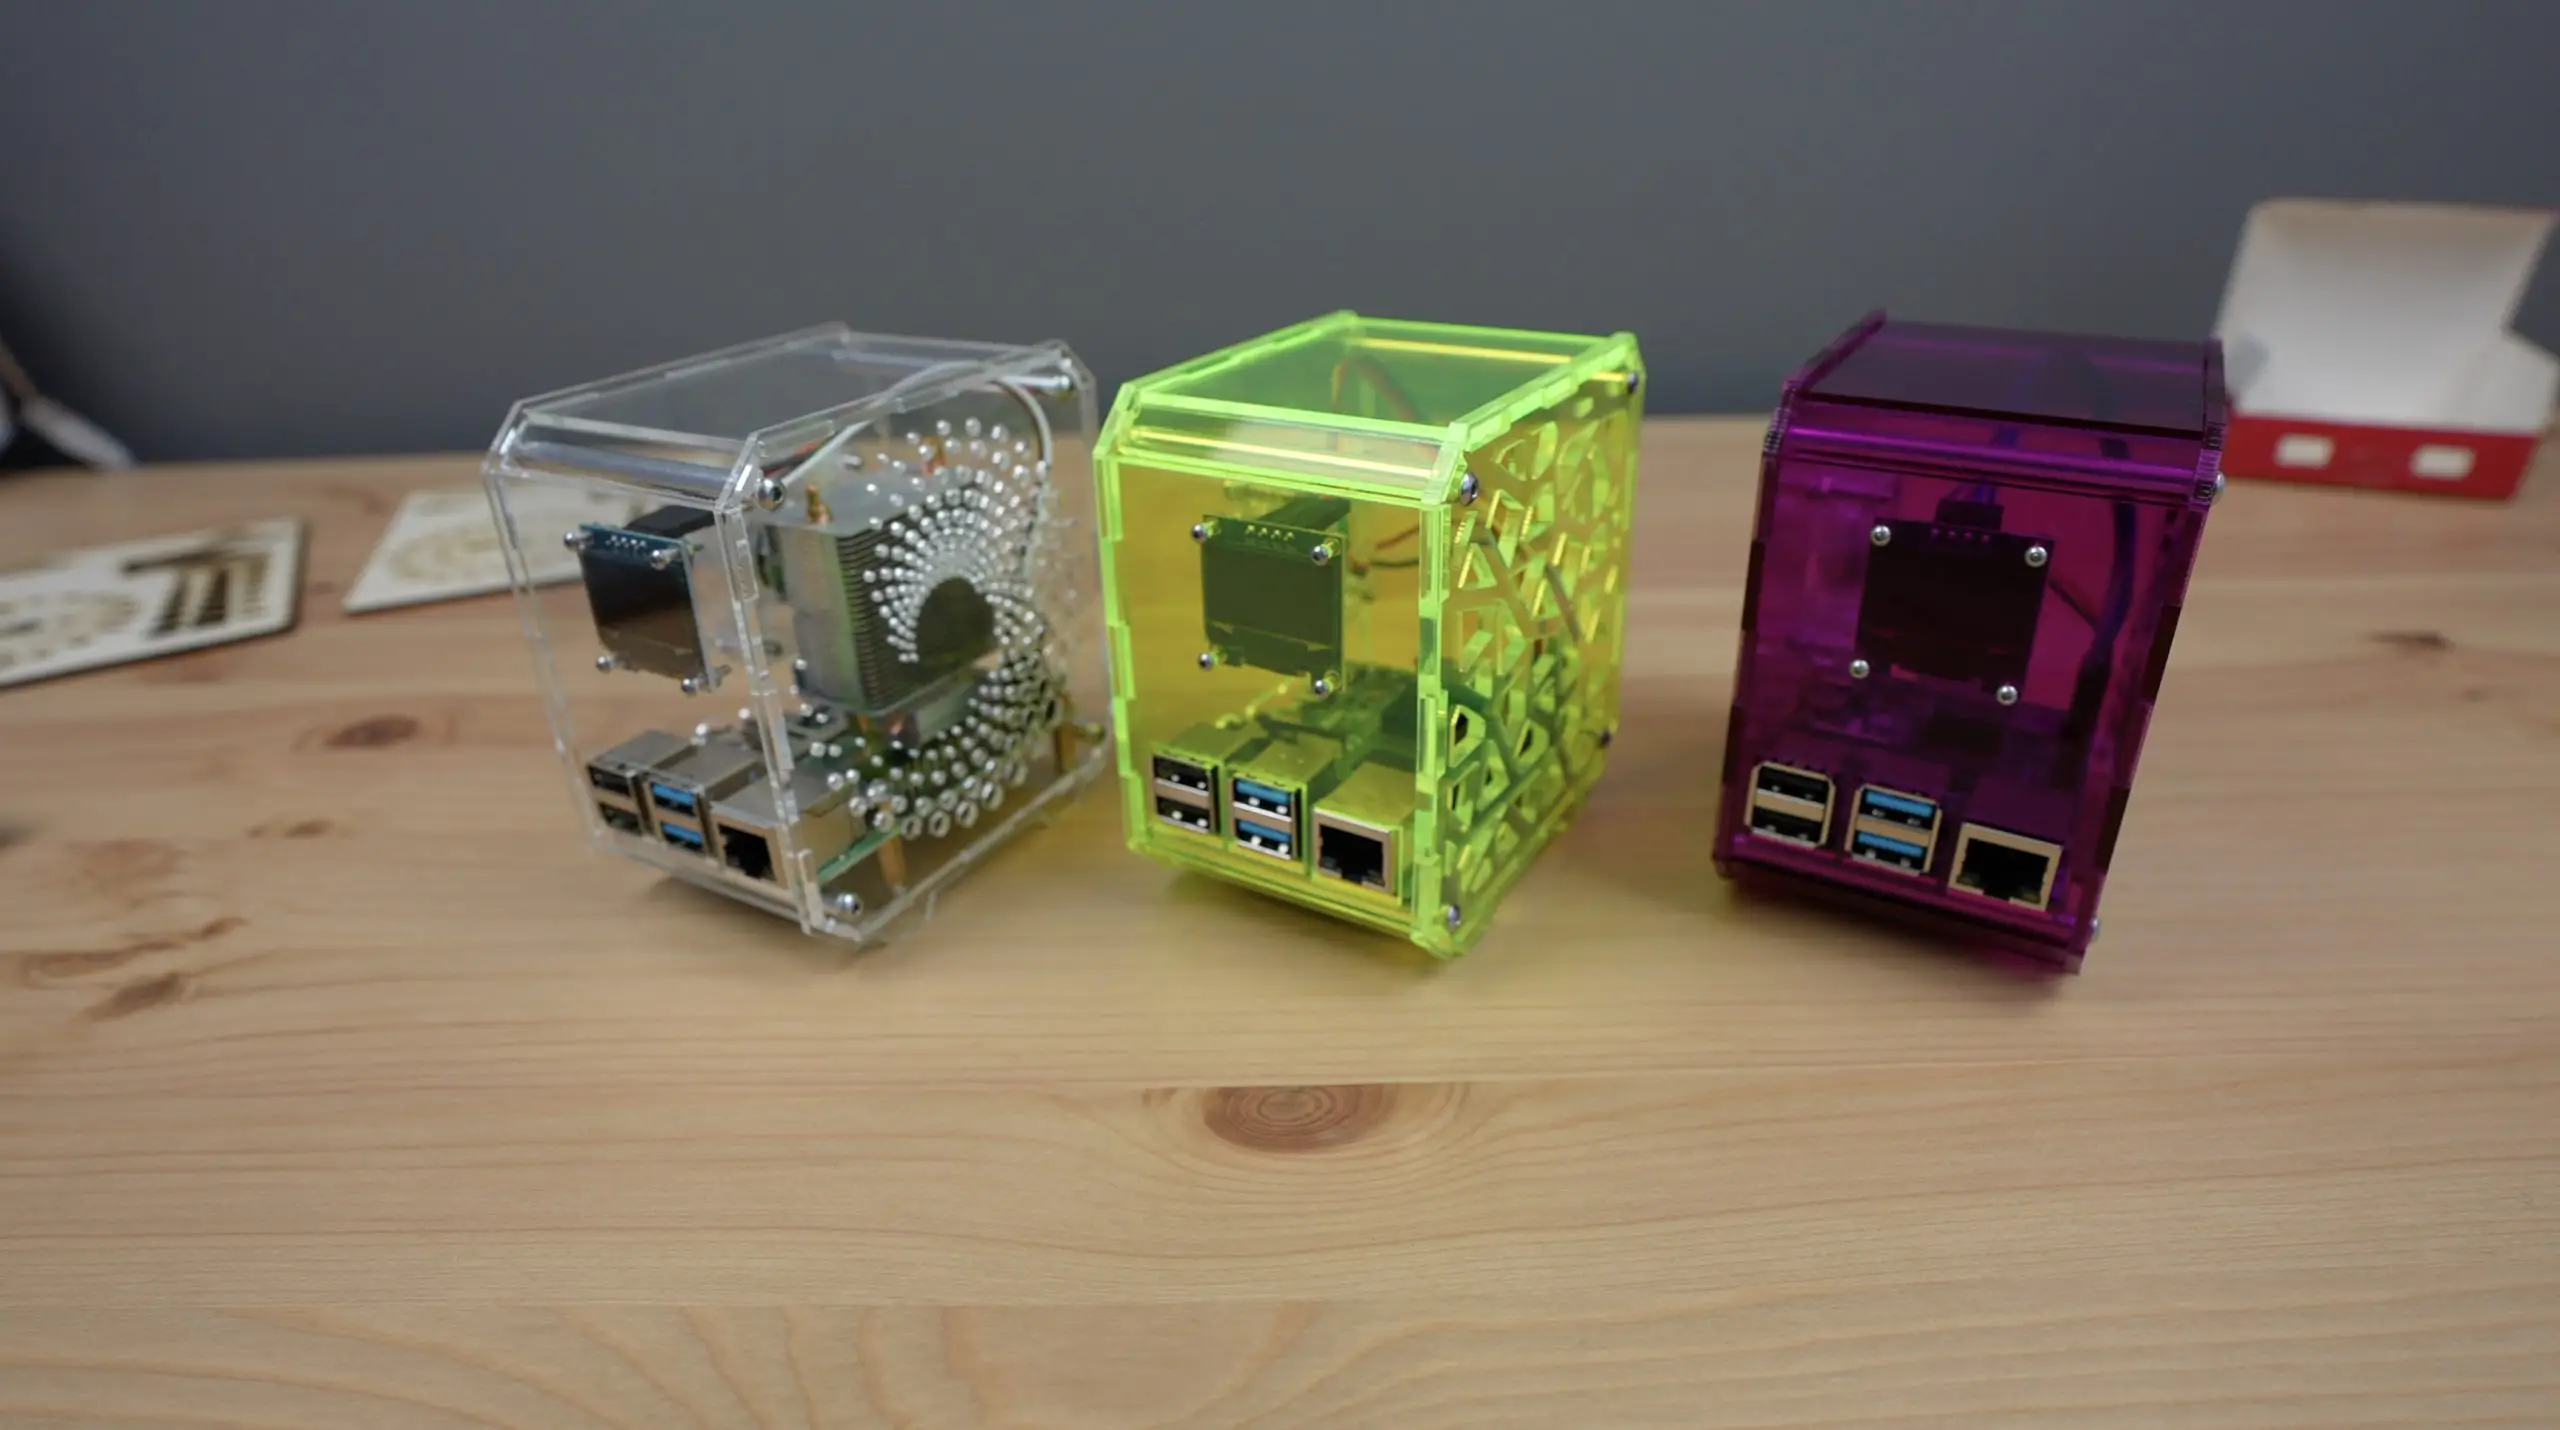 Completed All Acrylic Raspberry Pi Cases